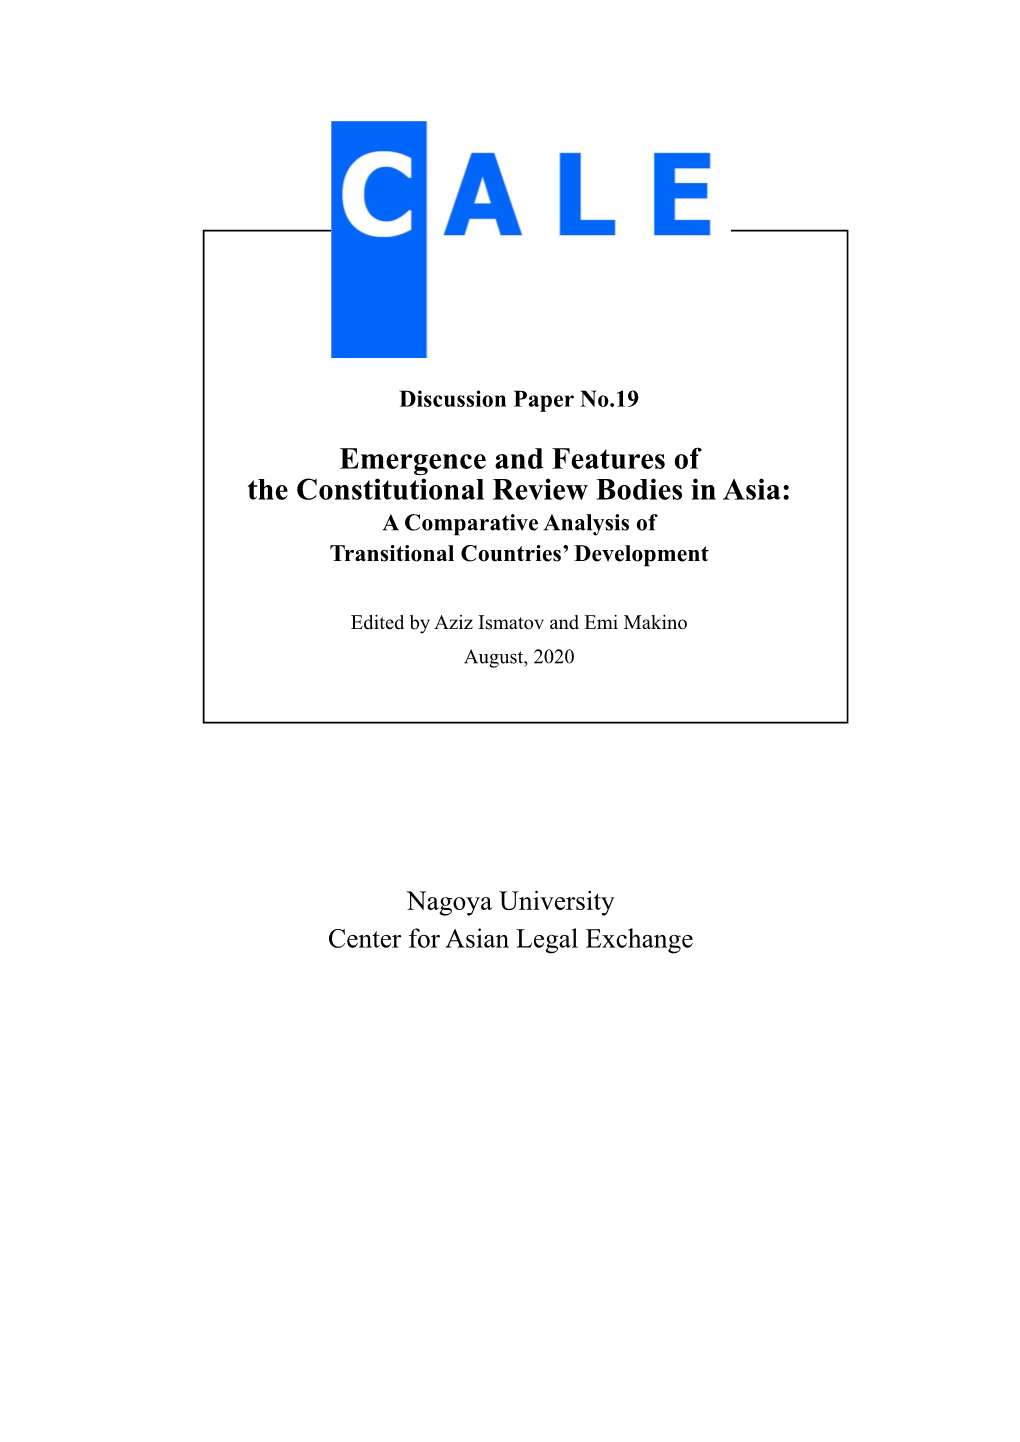 Emergence and Features of the Constitutional Review Bodies in Asia: a Comparative Analysis of Transitional Countries’ Development